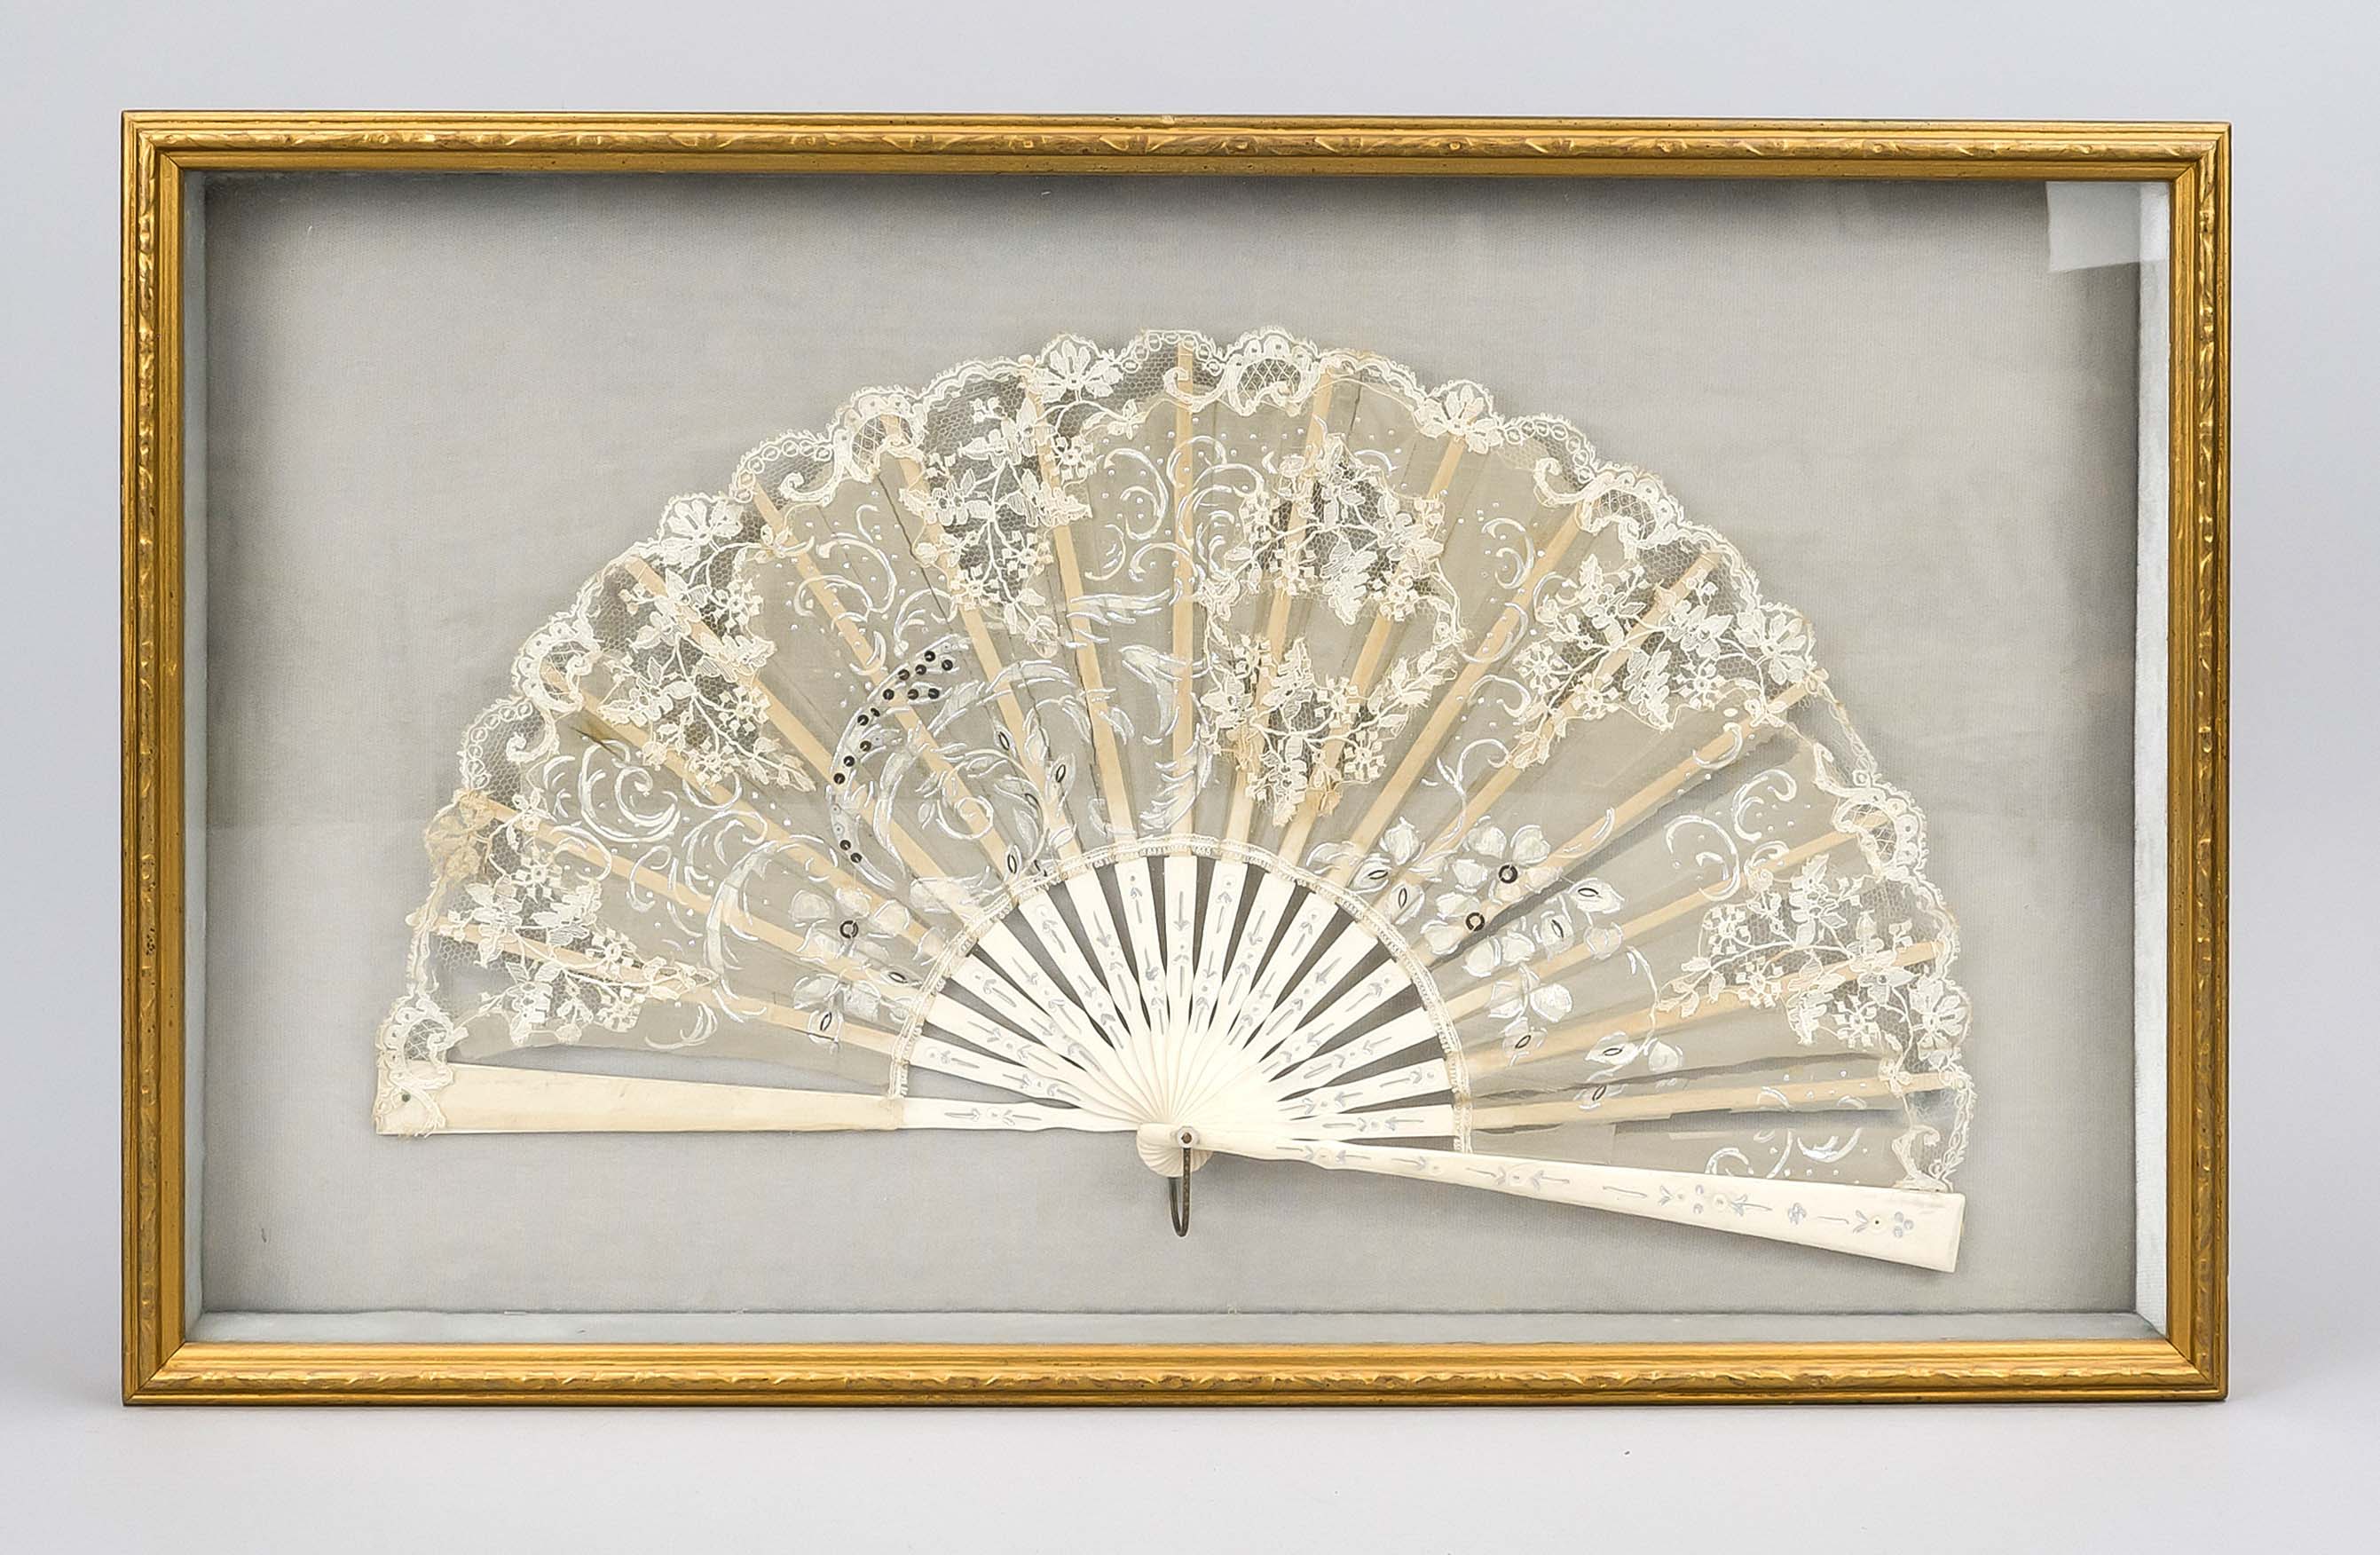 Fan in a display case frame, fan 19th century, leg rods covered with semi-transparent gauze fabric